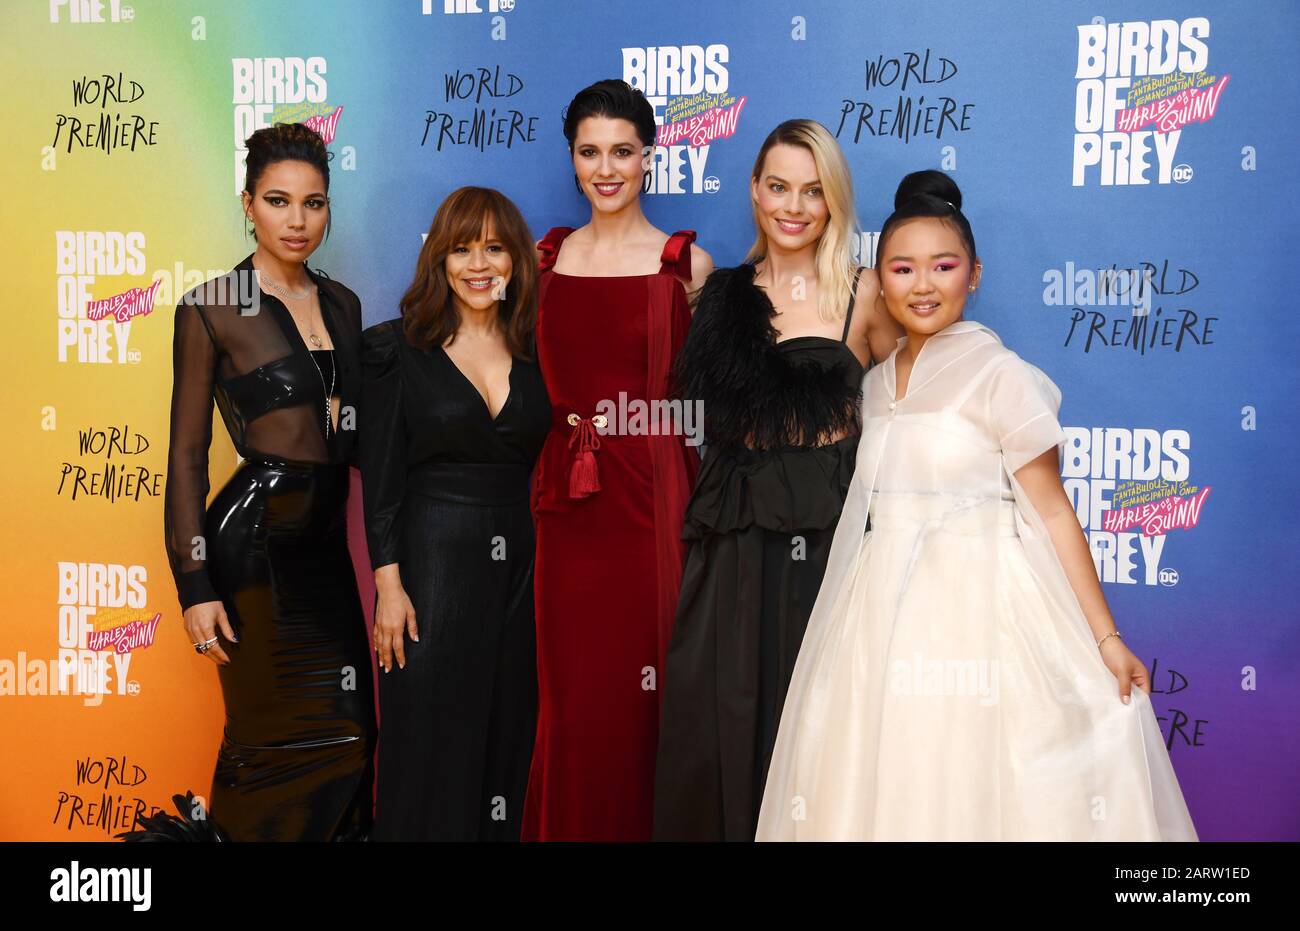 Jurnee Smollett-Bell, Rosie Perez, Mary Elizabeth Winstead, Margot Robbie  and Ella Jay Brasco attending the world premiere of Birds of Prey and the  Fantabulous Emancipation of One Harley Quinn, held at the